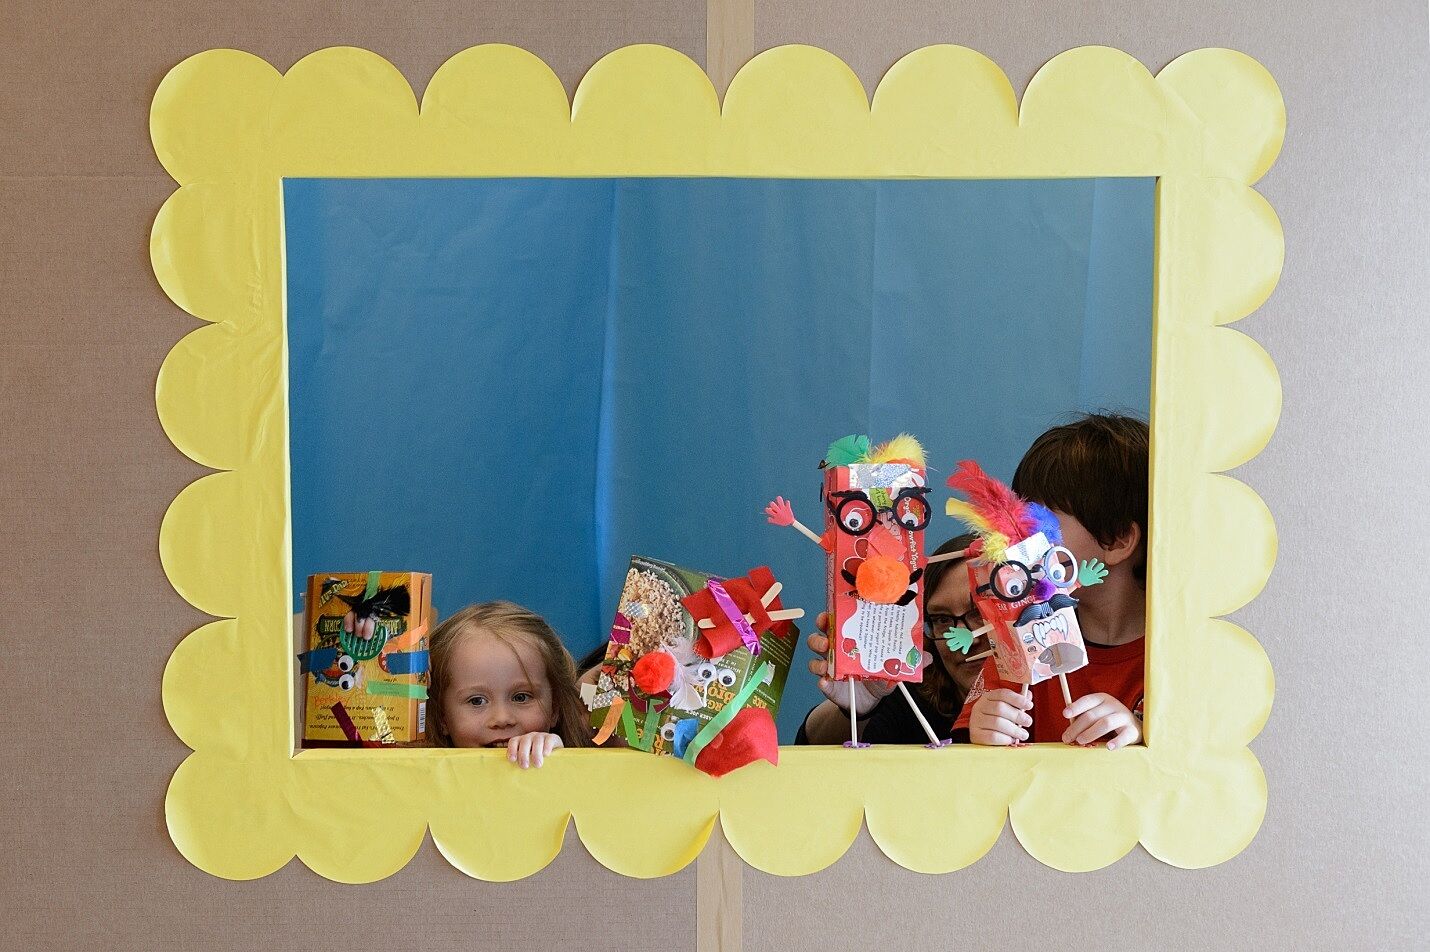 Staging a puppet show by children